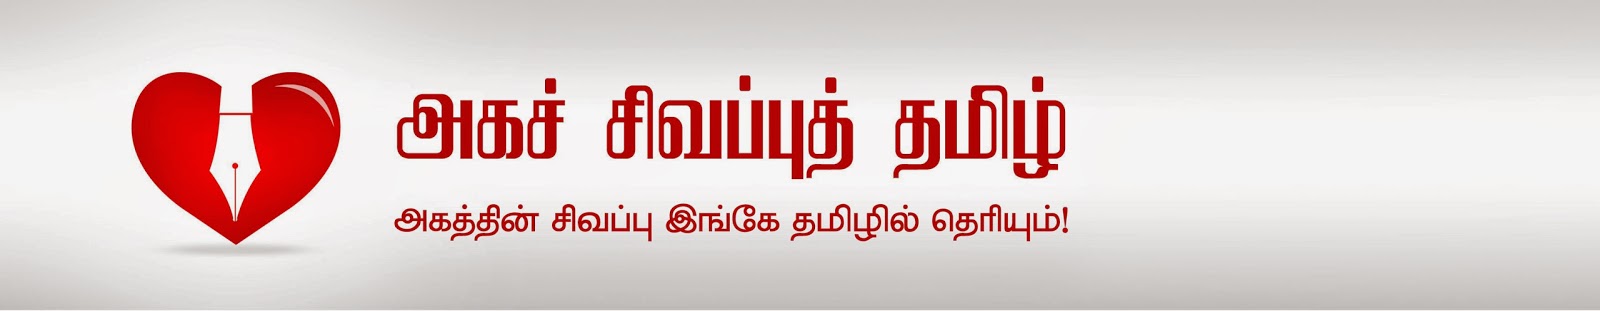 Aga Sivappu Thamizh - The Blog must read by every Tamil!